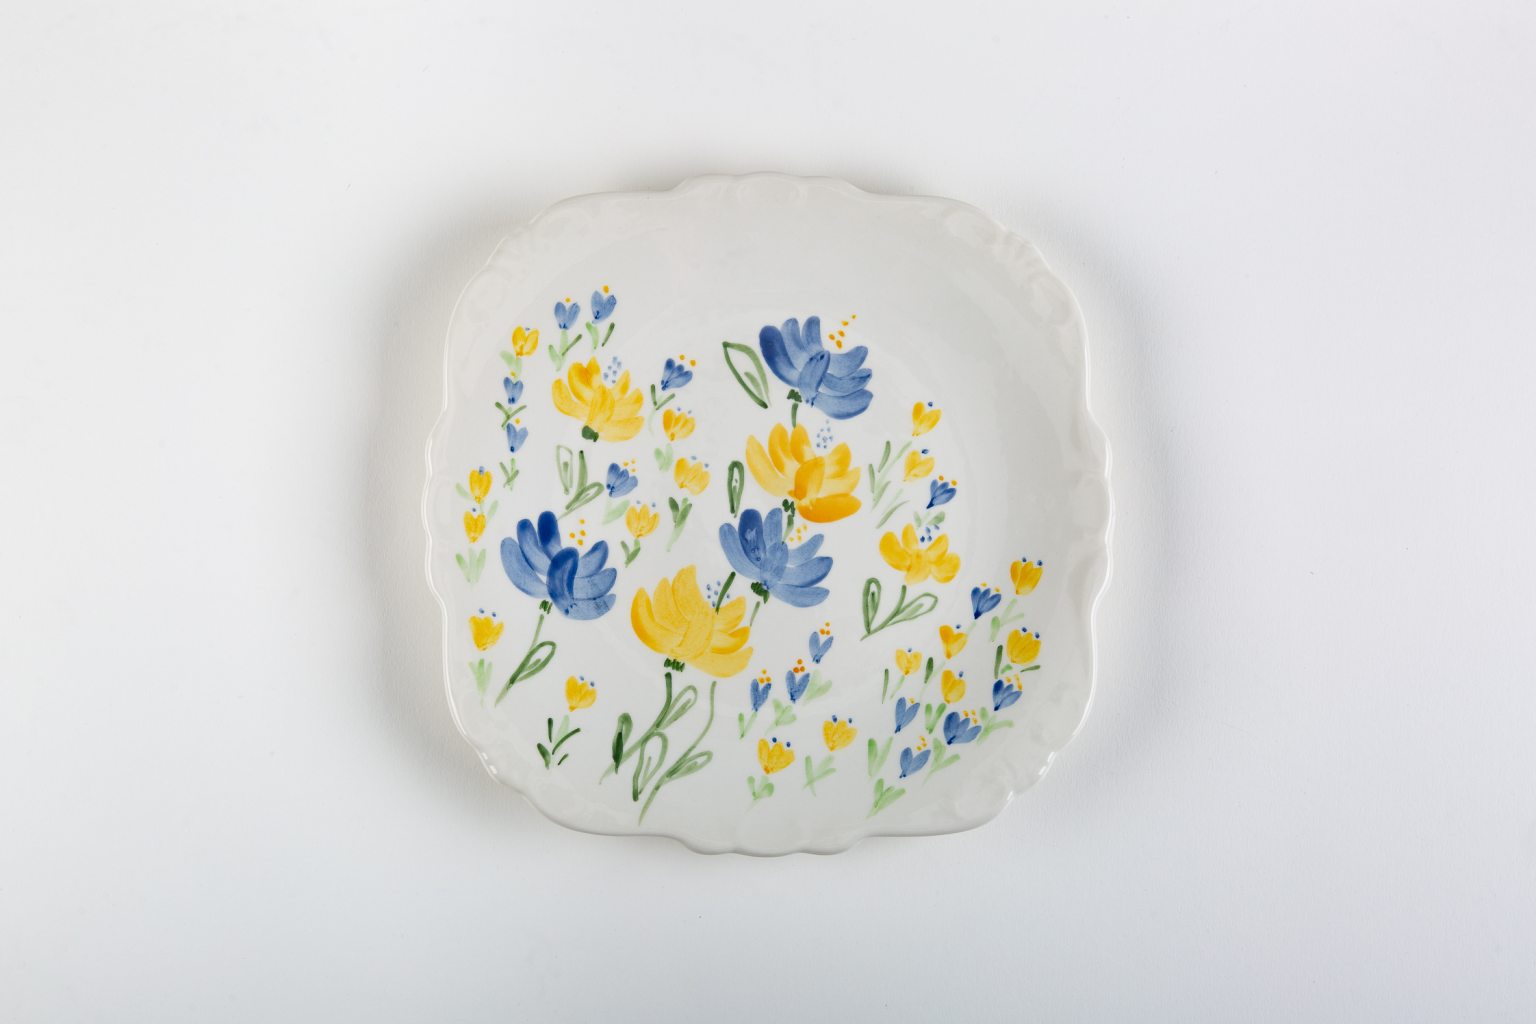 Handmade large platter with yellow & blue flowers